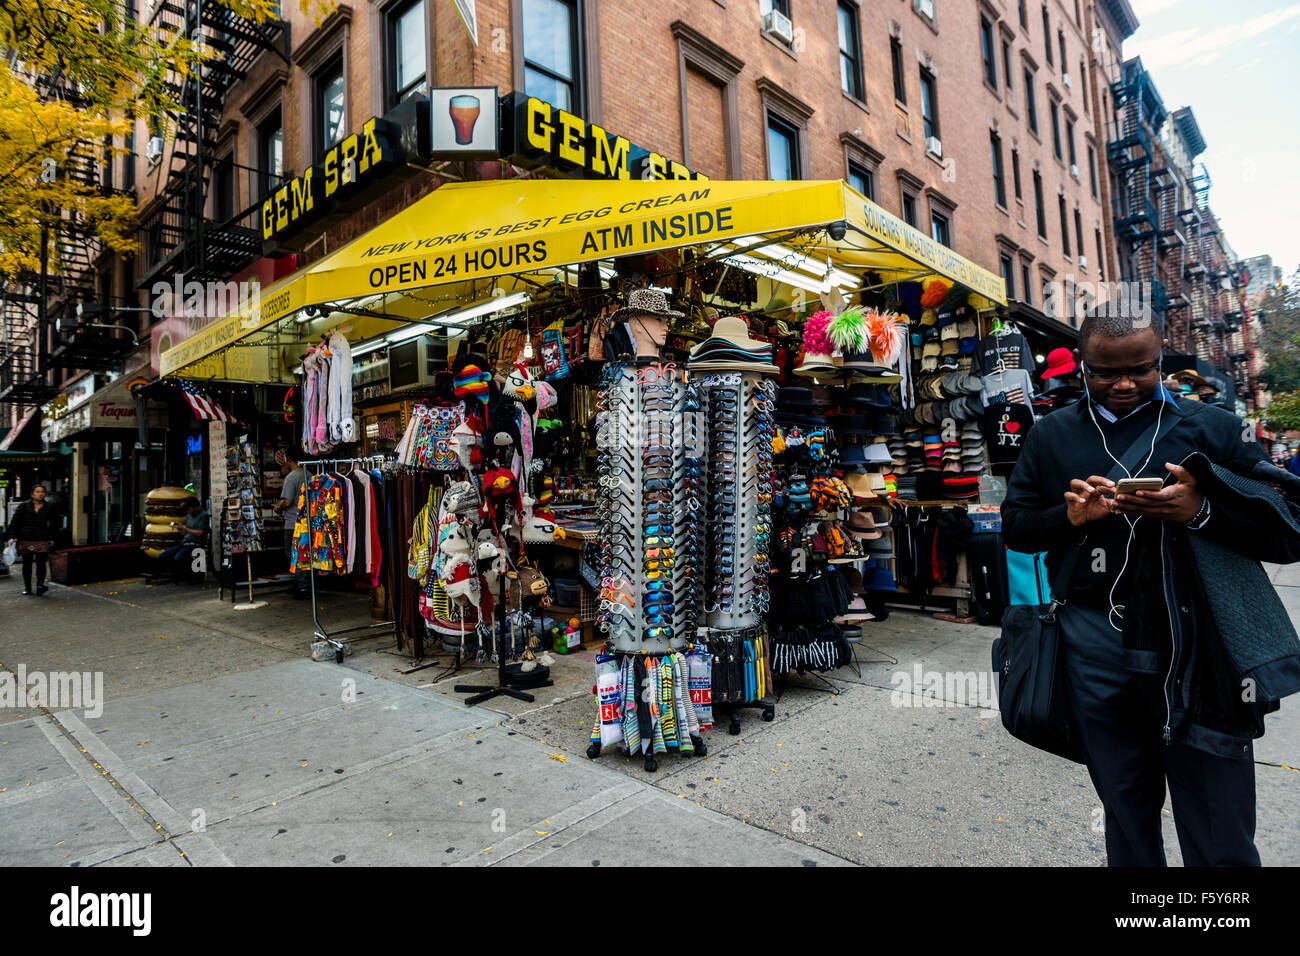 New York, NY 6 November 2015 - Man with an iPhone outside Gem Spa on Saint Mark's Place ©Stacy Walsh Rosenstock/Alamy Stock Photo